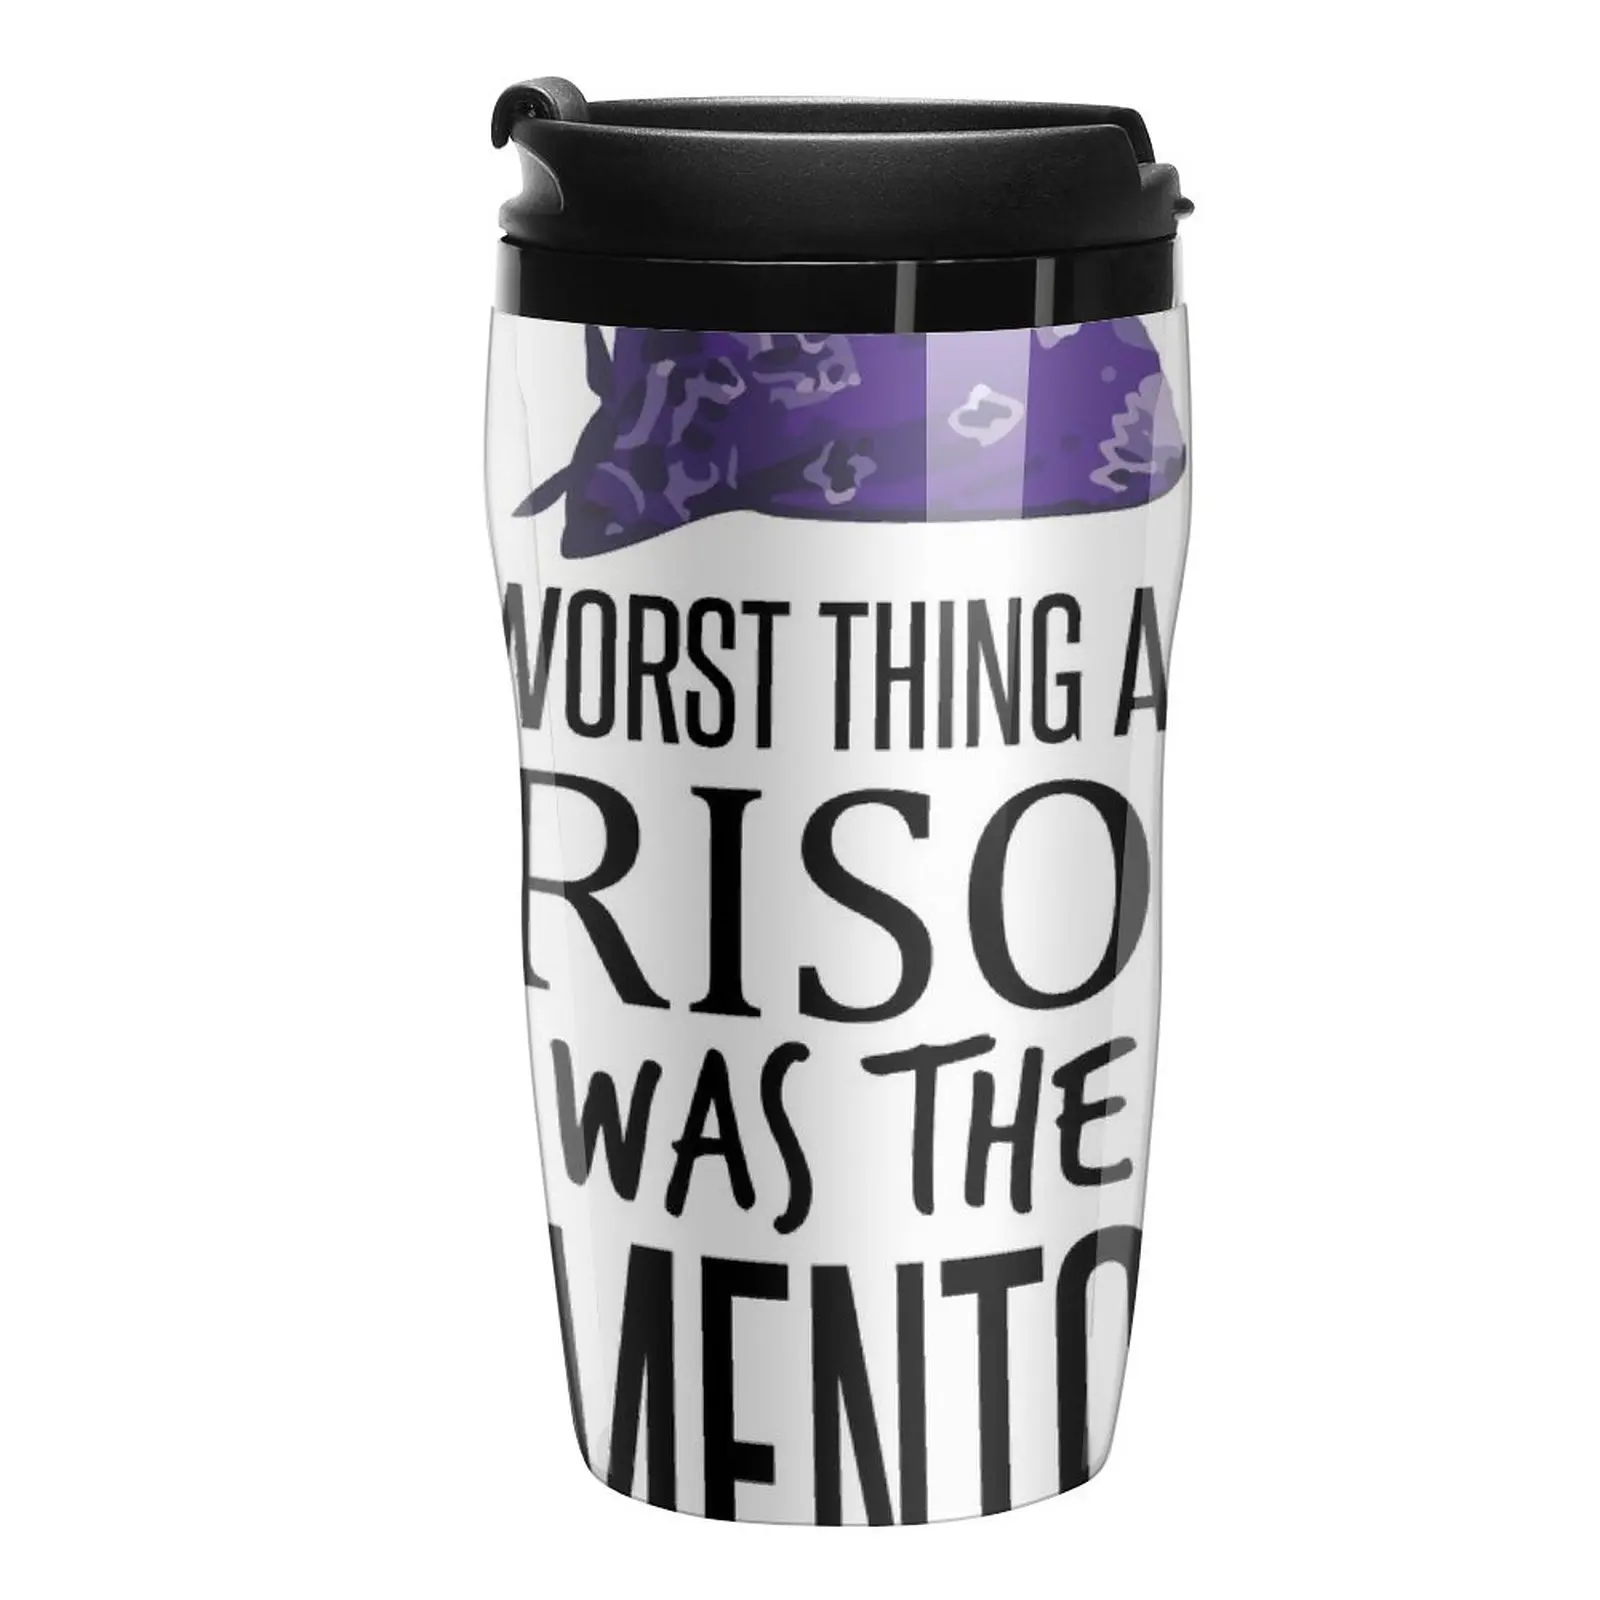 

New The Worst Thing About Prison was the Dementors Travel Coffee Mug Sets Of Te And Coffee Cups Glasses For Coffee